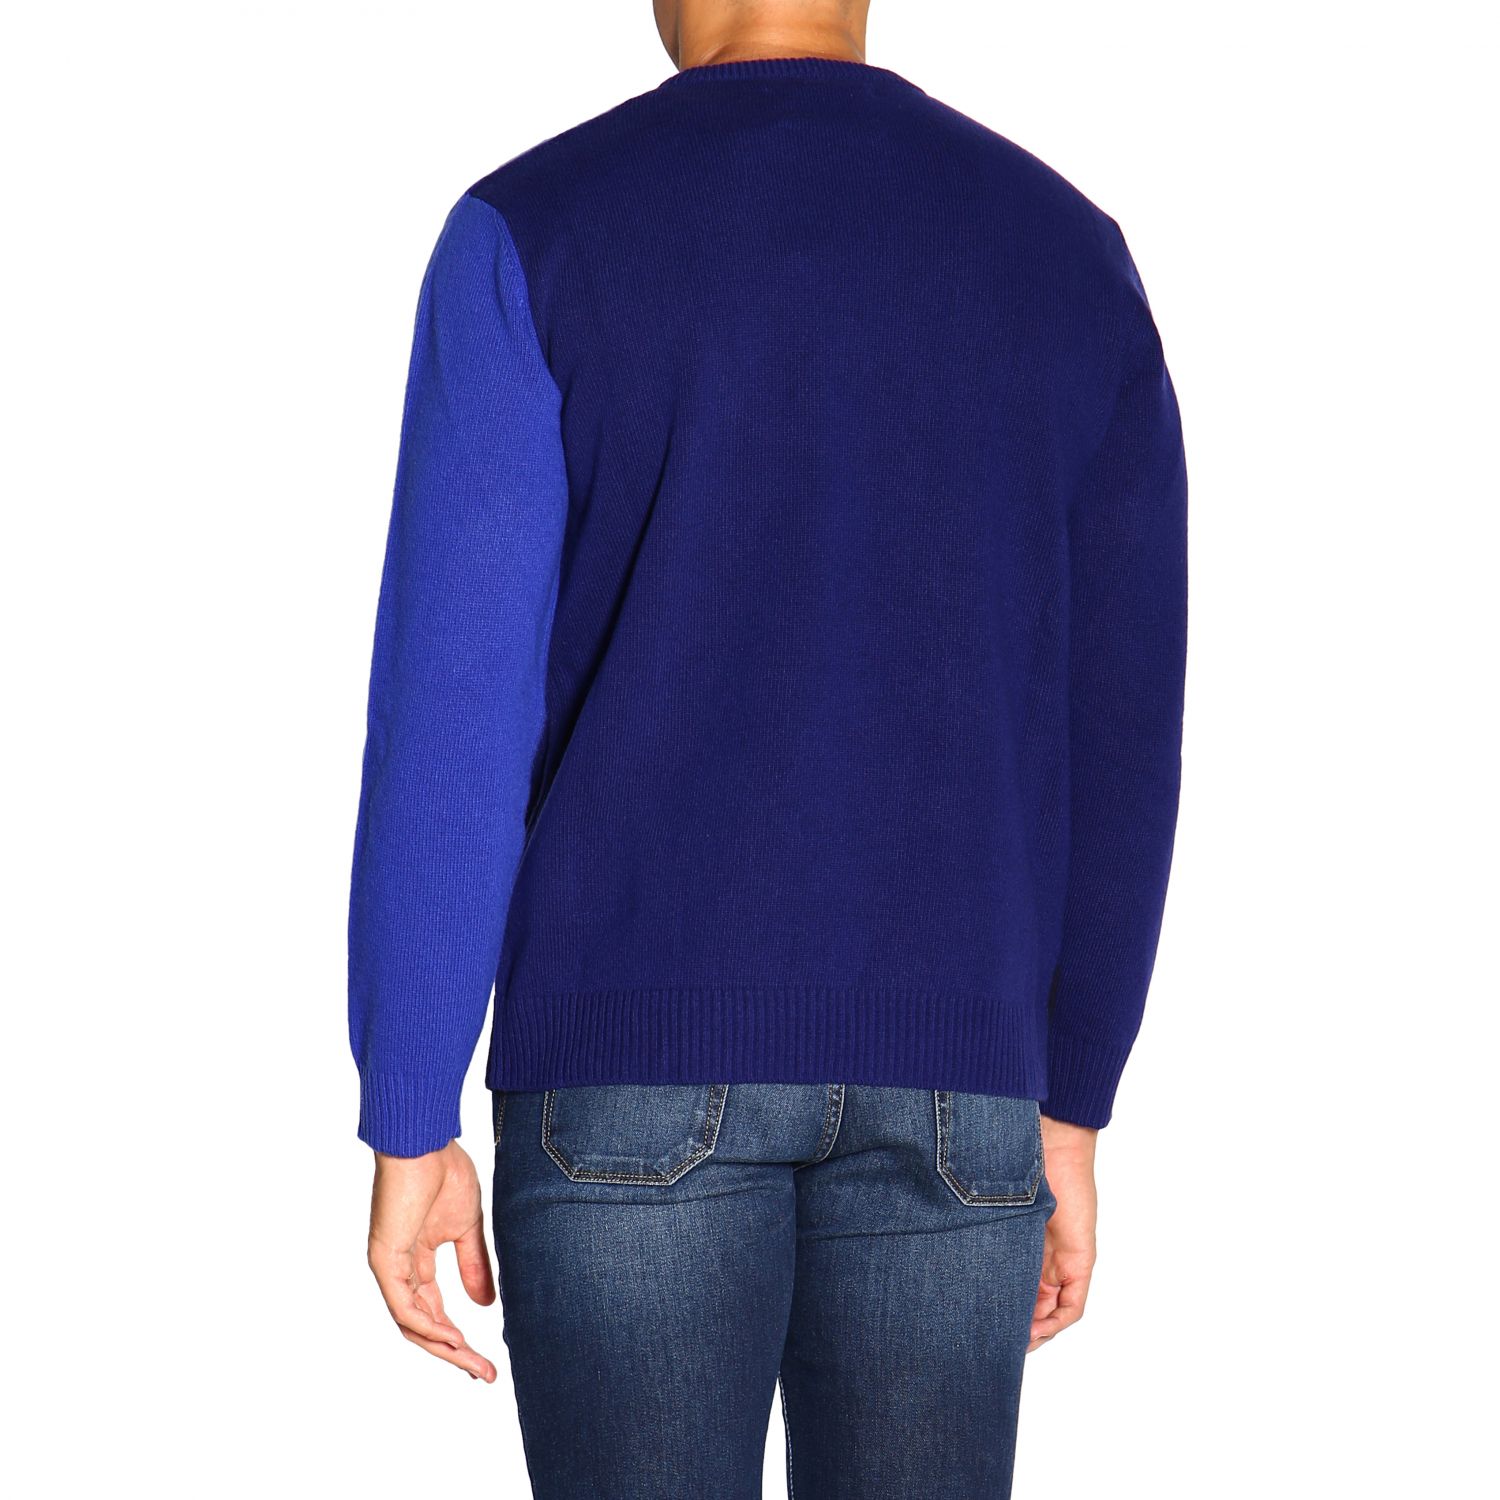 Iceberg Outlet: sweater for man - Blue | Iceberg sweater A010 7077 ...